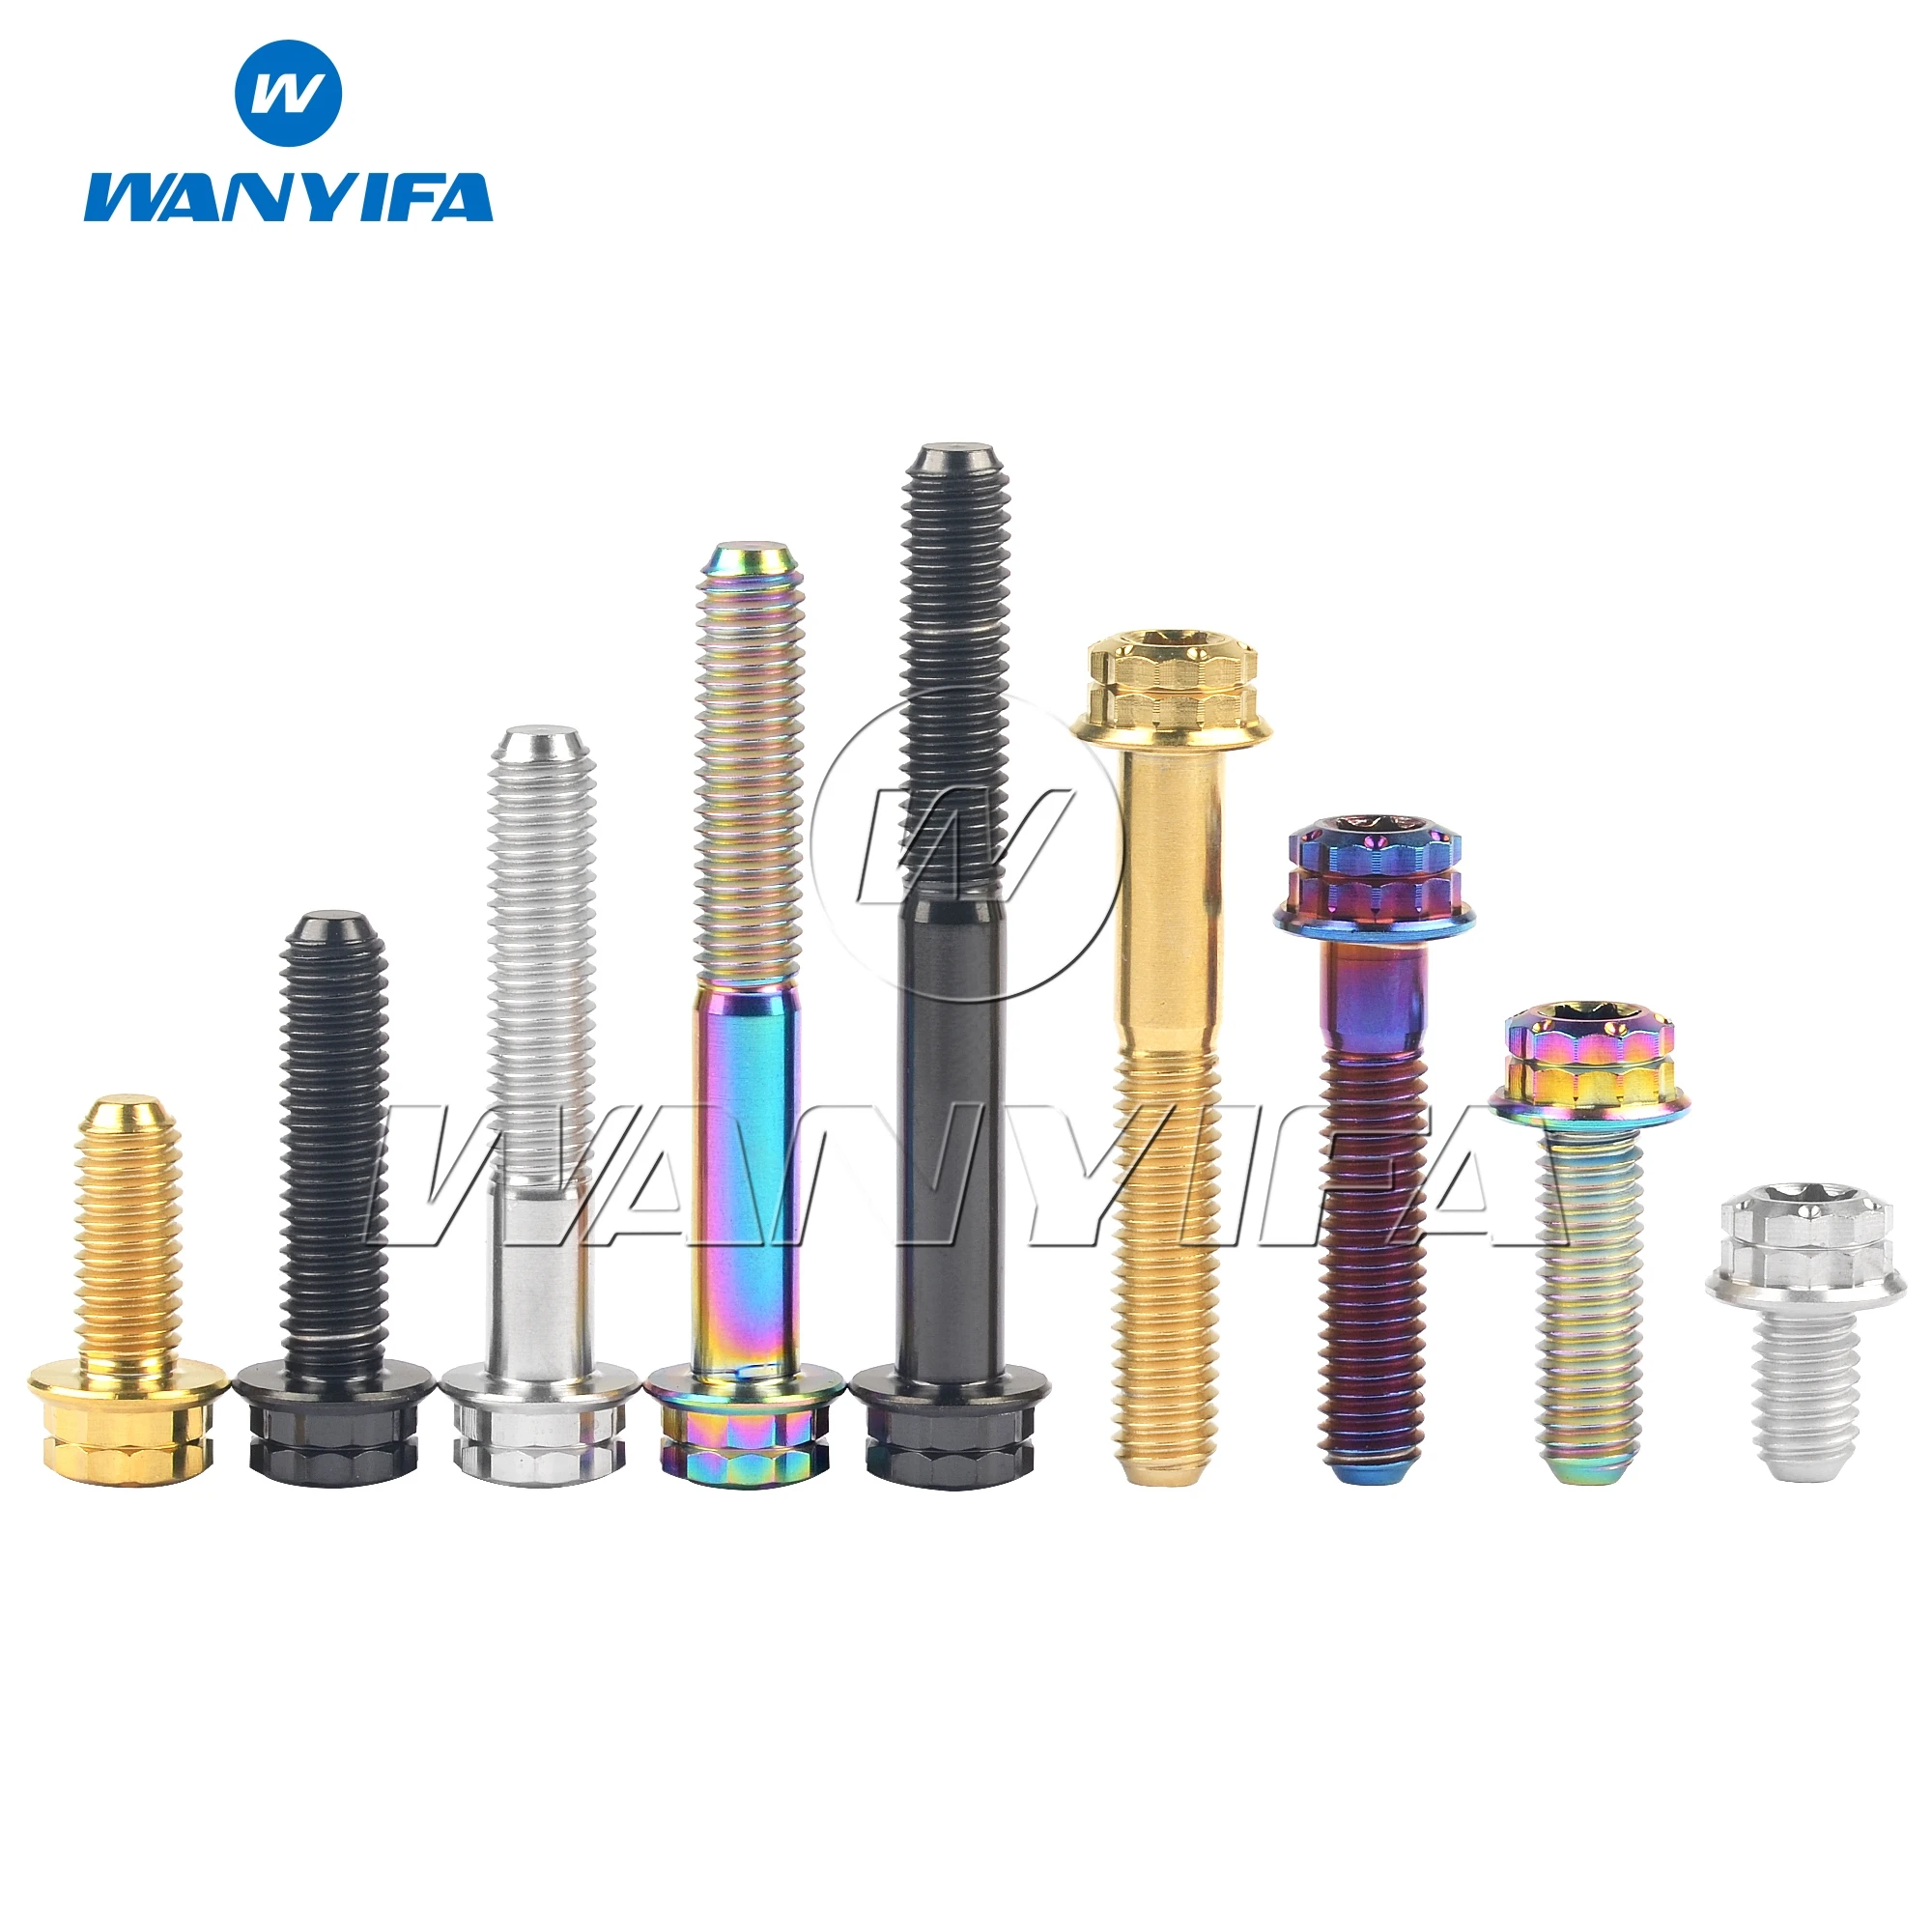 

Wanyifa Titanium Bolt M6x10 15 20 25 30 35 40 45 50mm Flange 12 Points Torx T30 Head Ti Screws for Bicycle Motorcycle